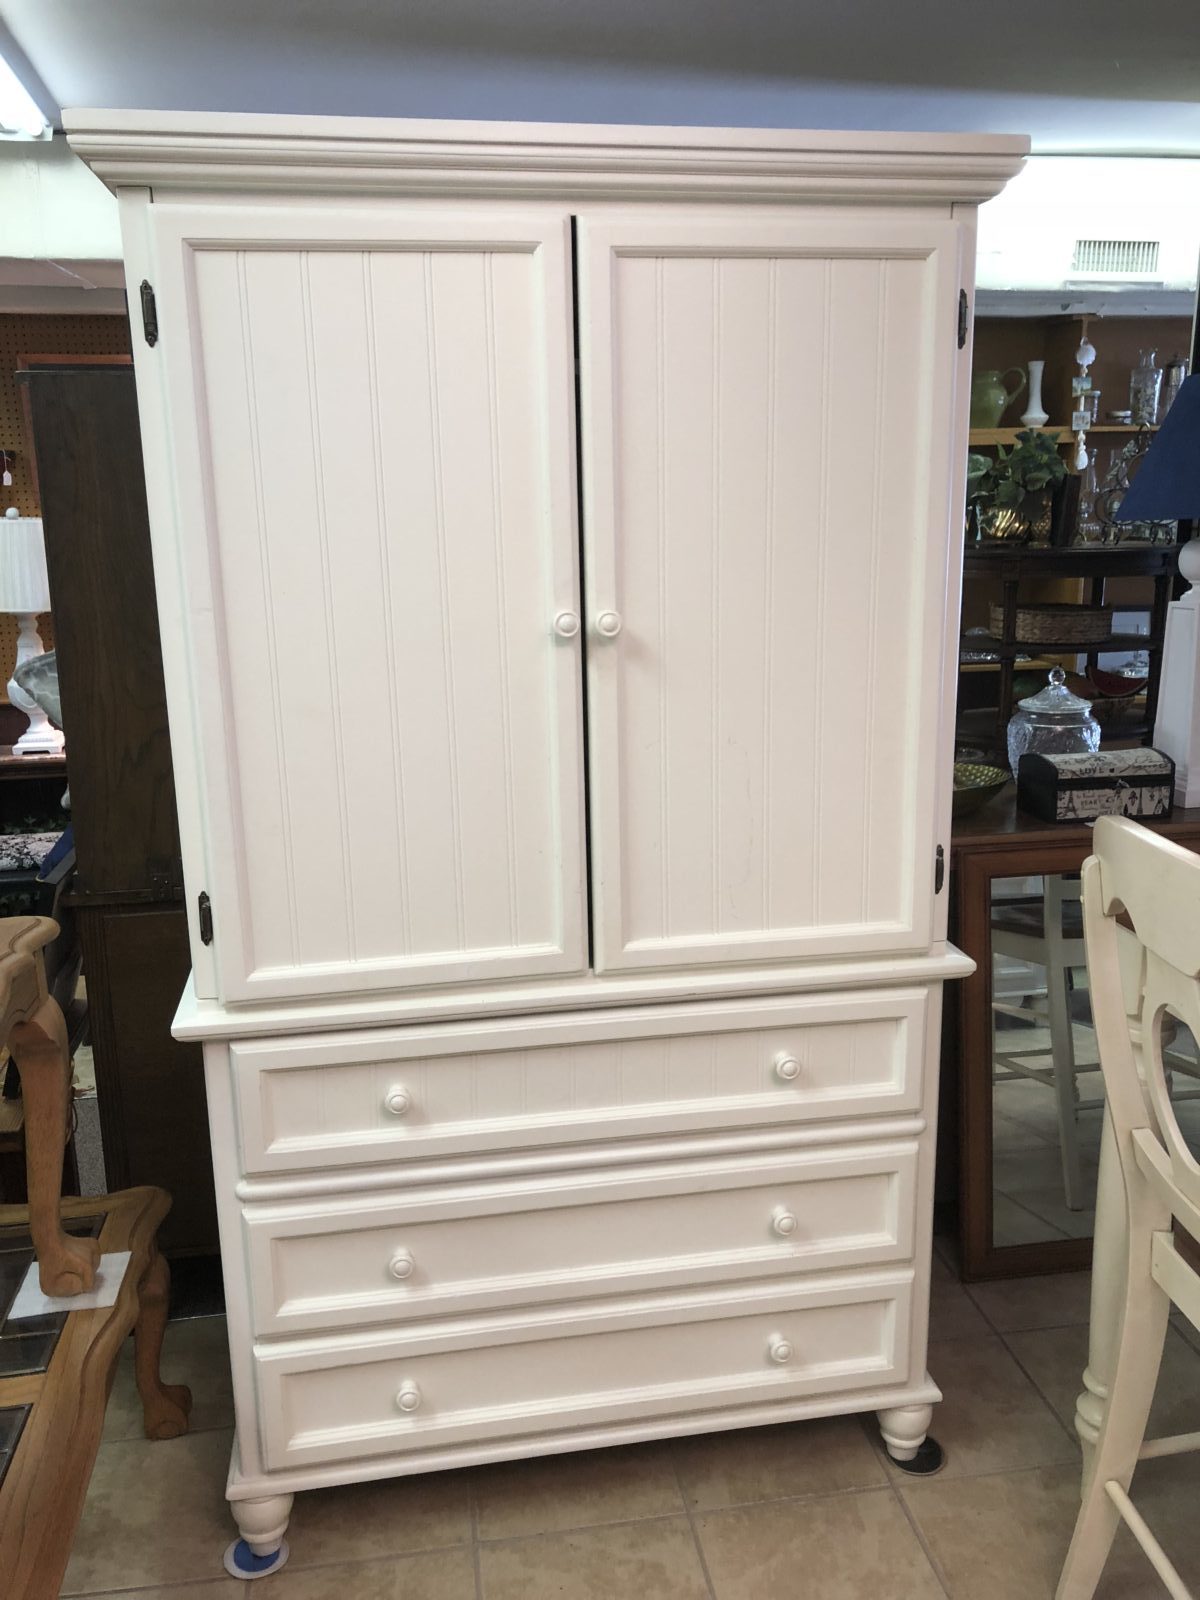 Armoire/Tv Cabinet • White wood armoire/tv Cabinet in excellent condition.